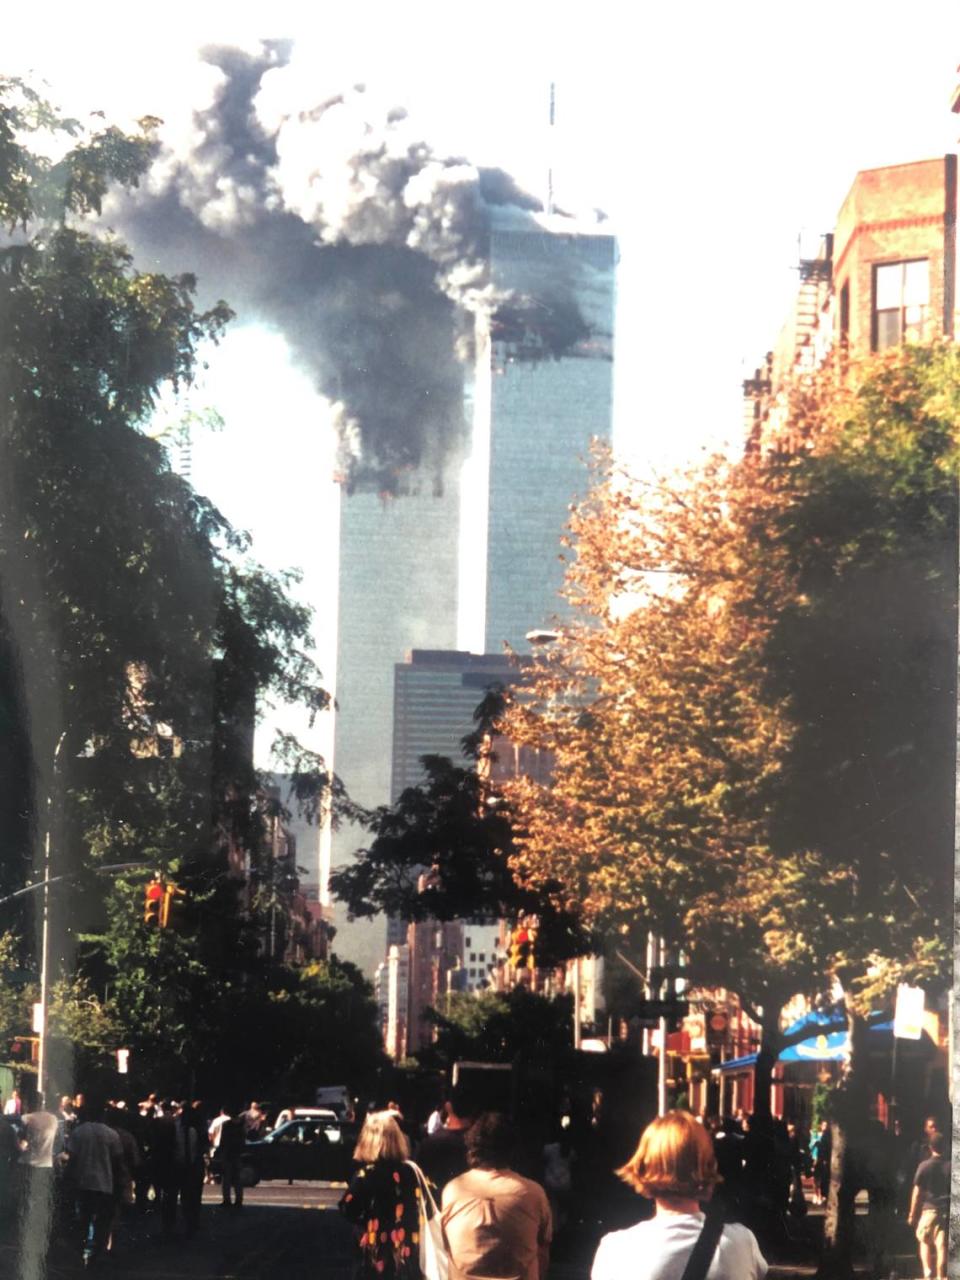 Kevin Larsh had gotten his camera and was standing at the corner of Broadway and Houston as the second plane hit the South tower.